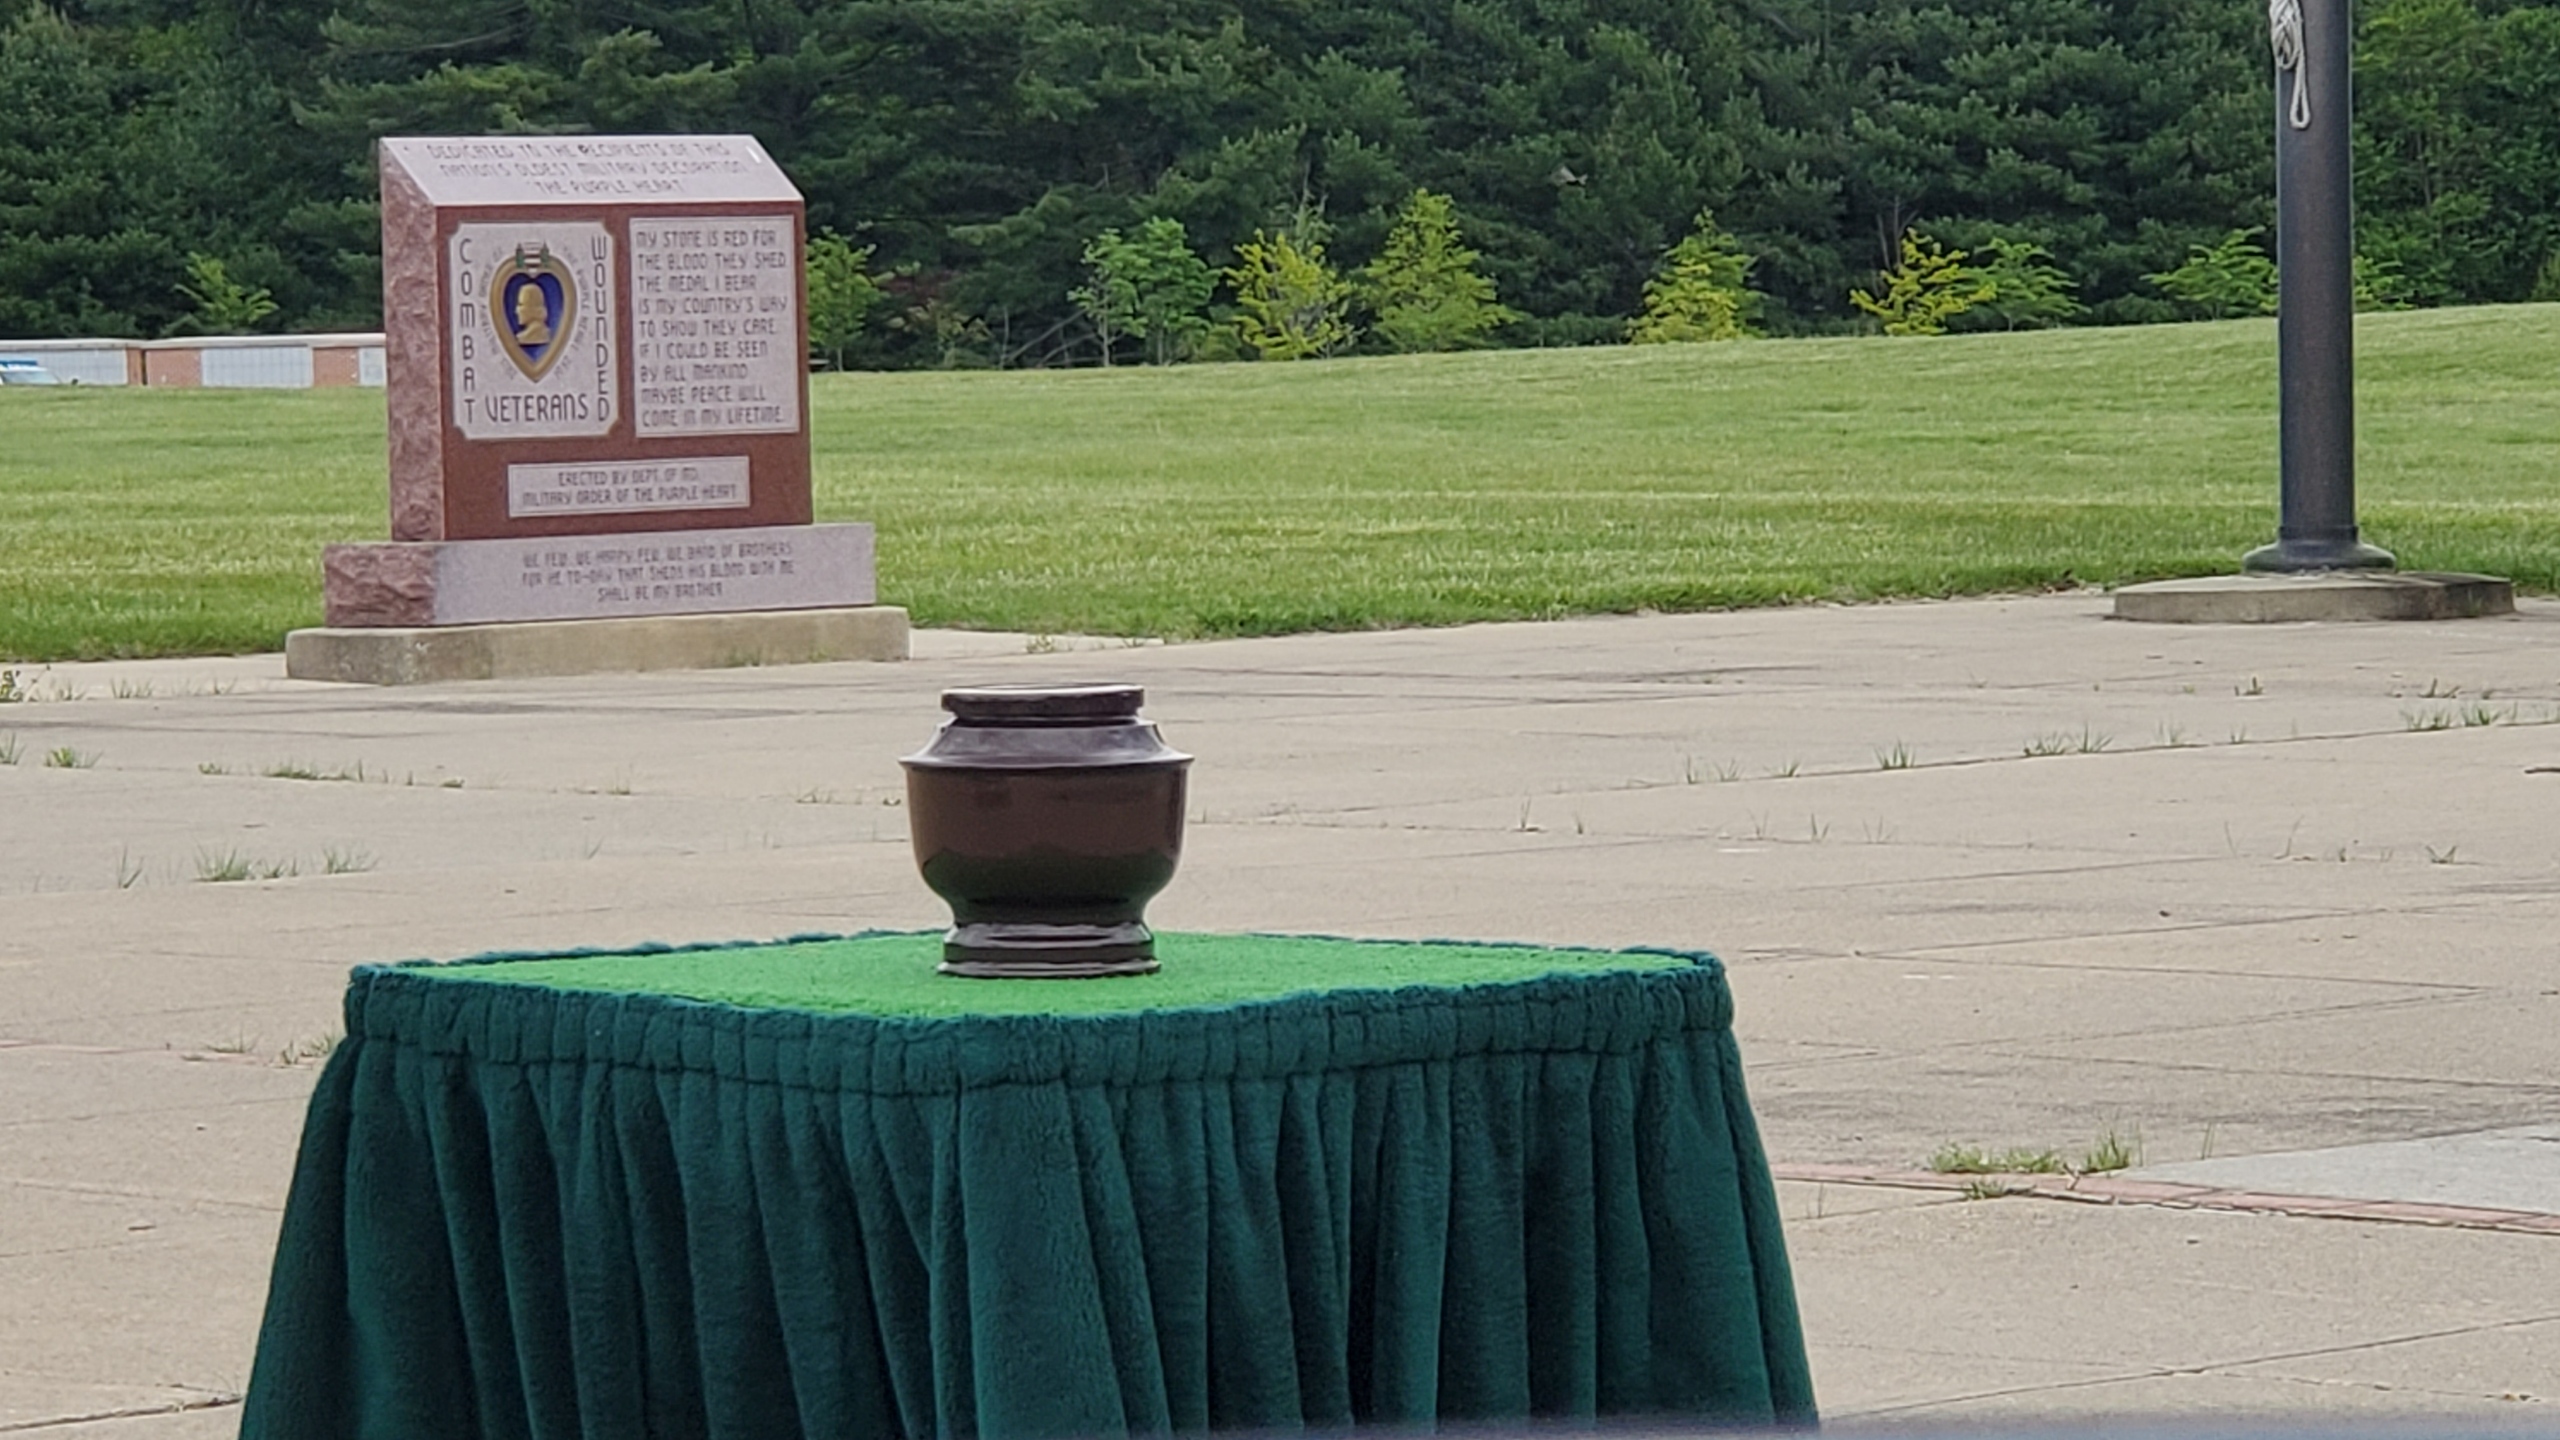 Photo of an urn sitting outdoors on a square platform dressed in green cloth. The location is a military cemetery.